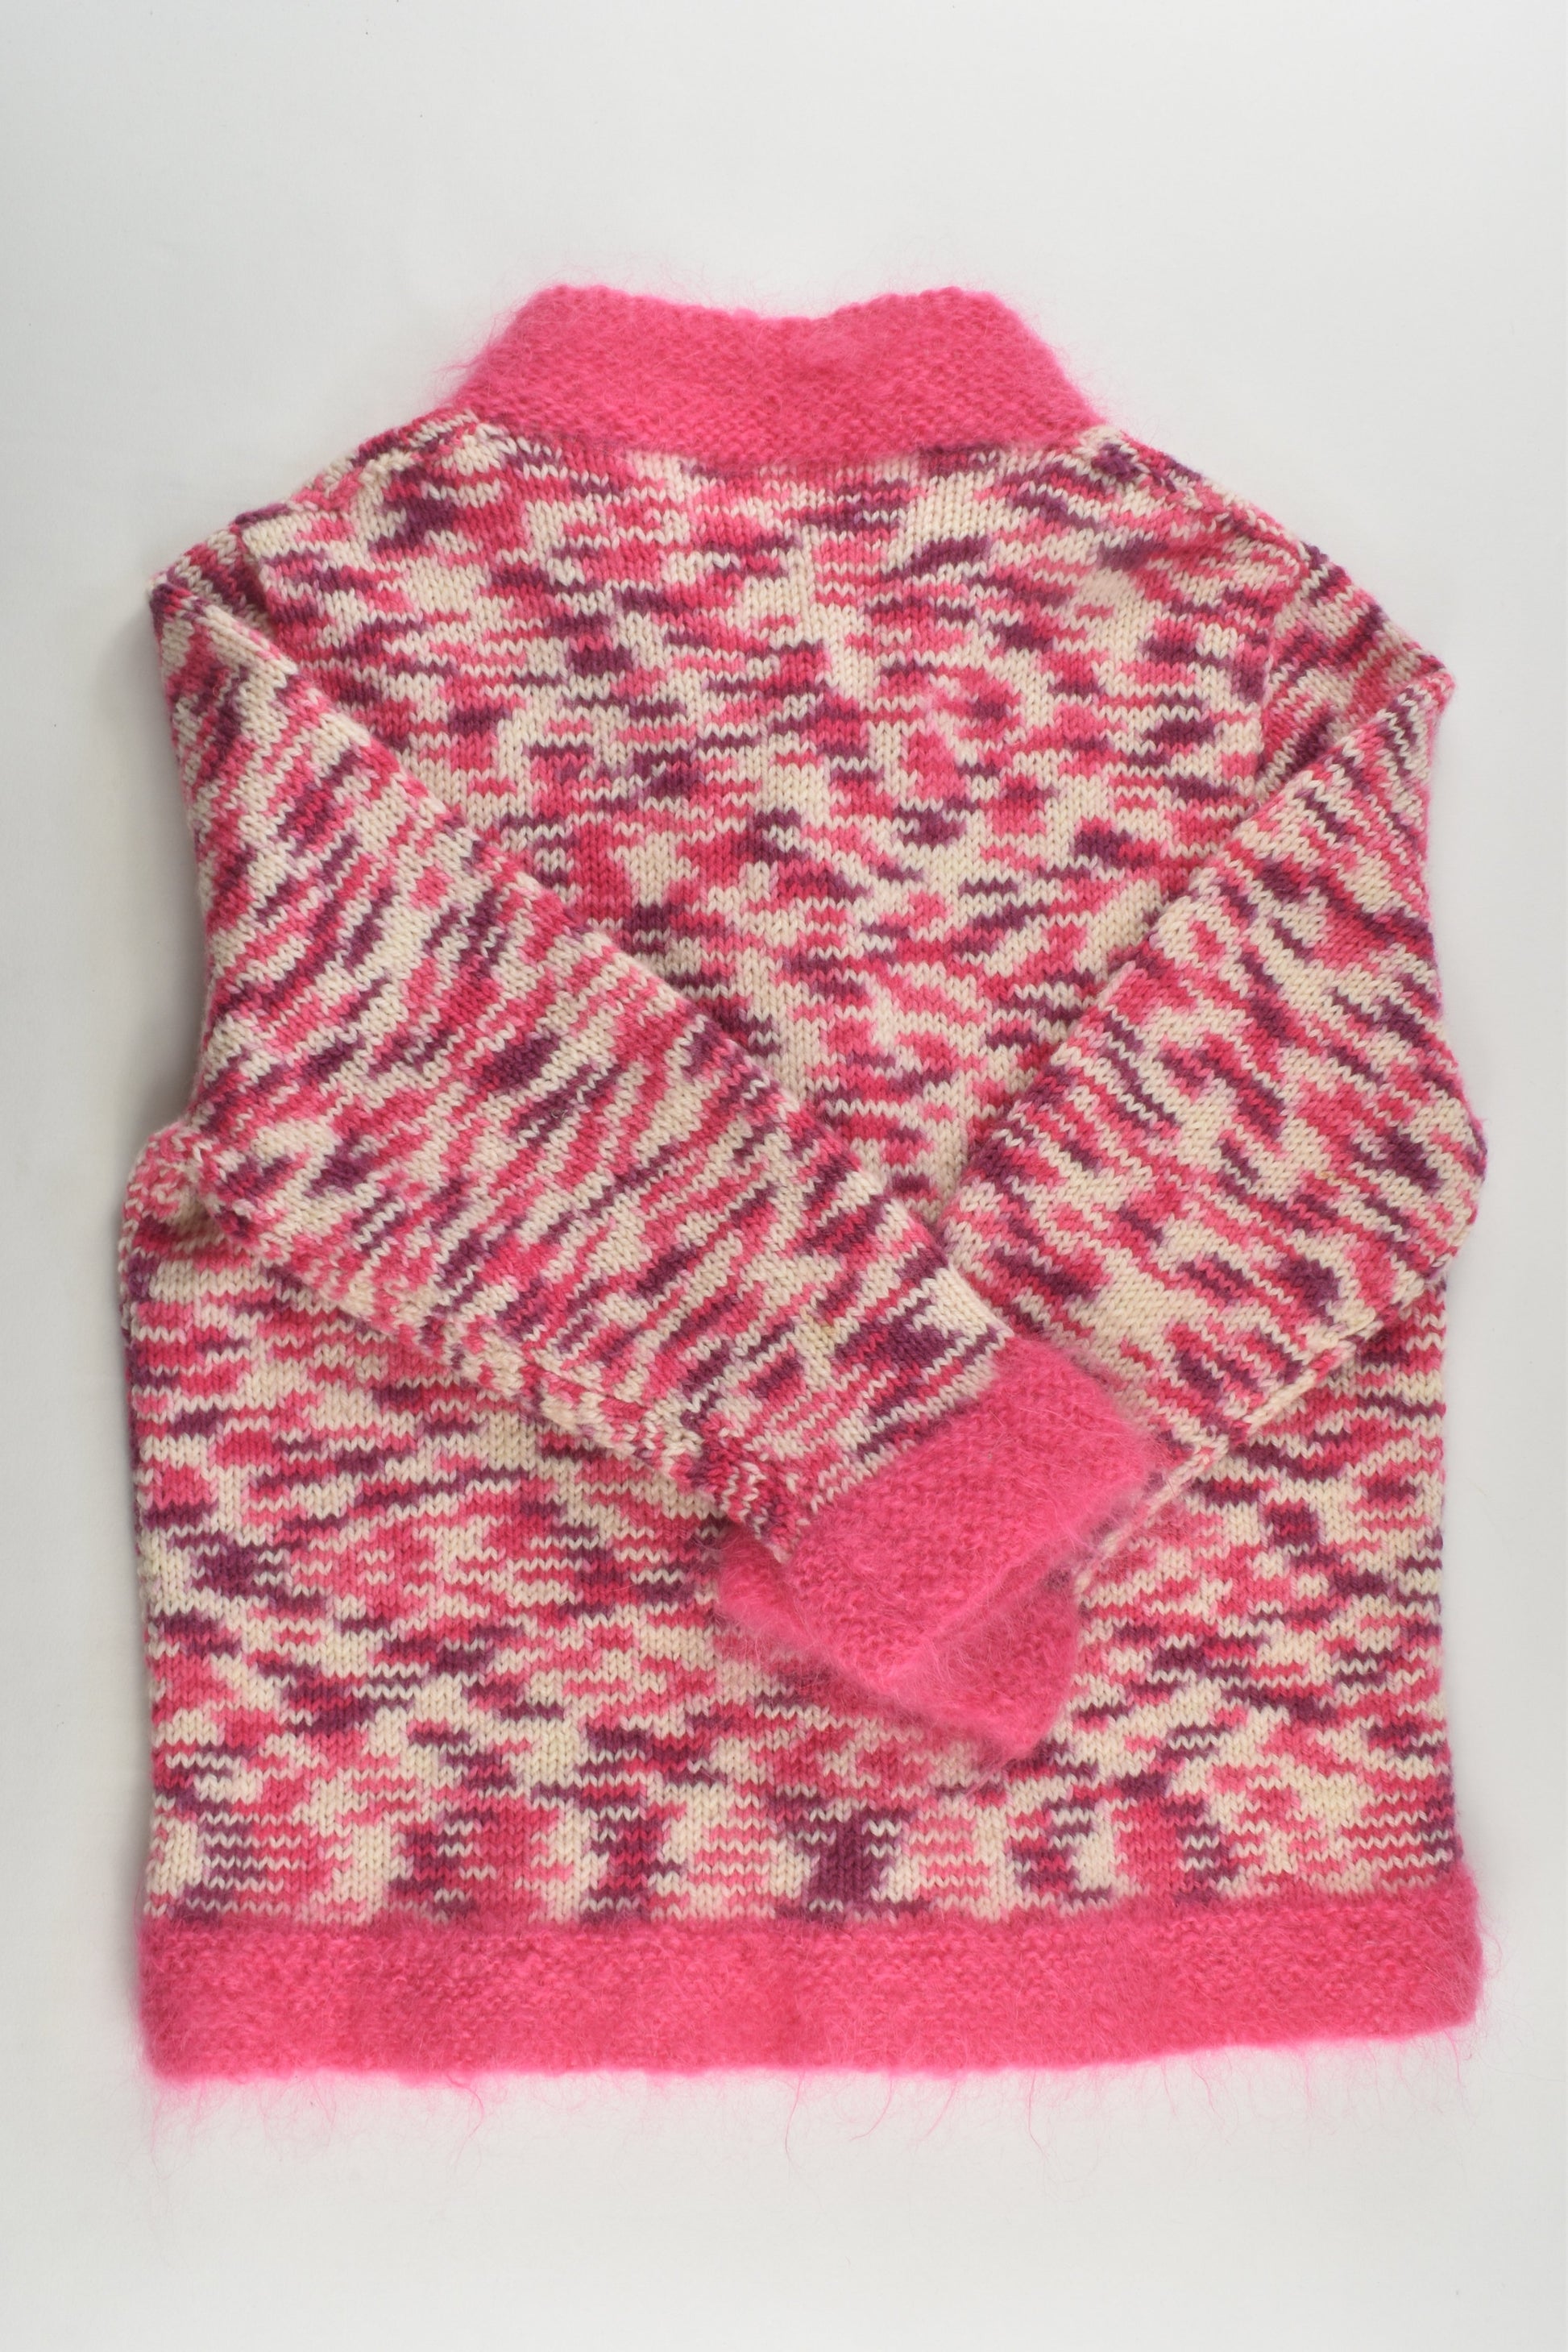 Handmade Size approx 8-10 Warm Knitted Cardigan